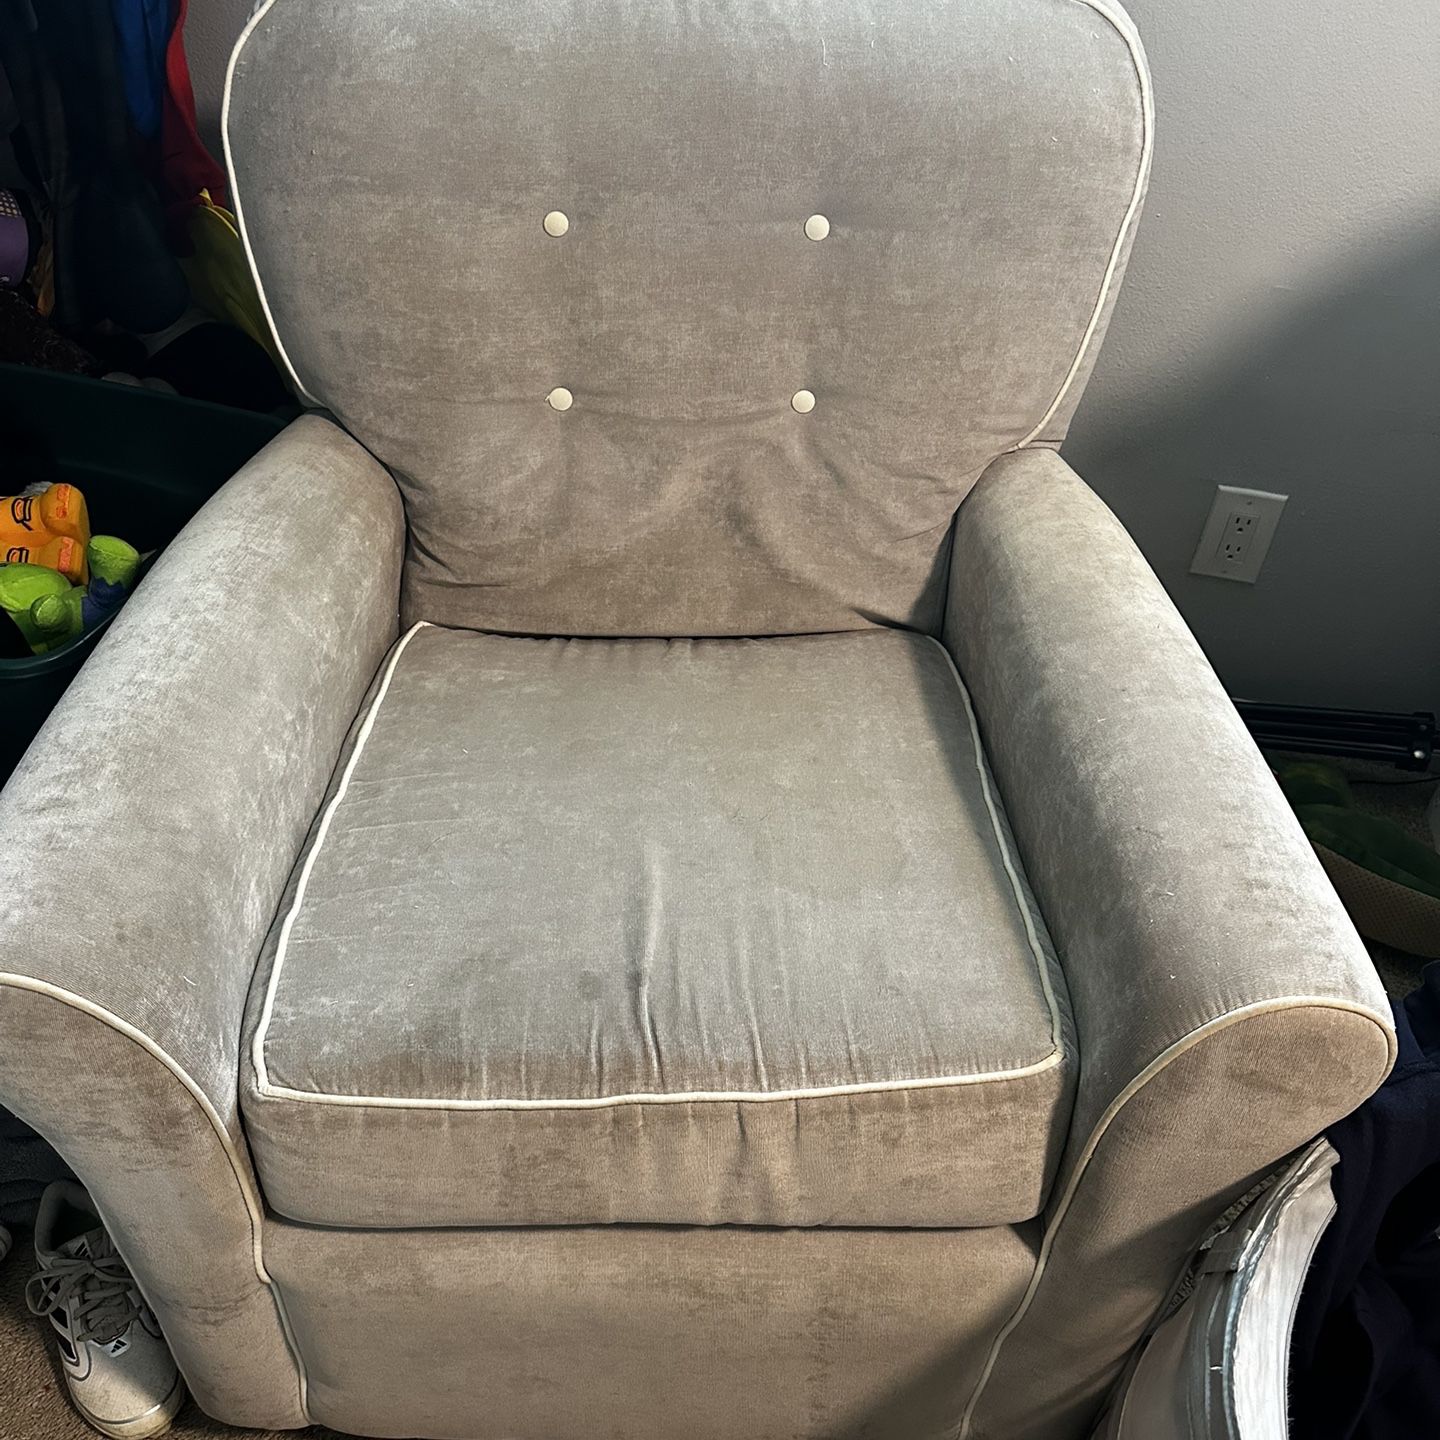 Comfy Glider and Ottoman Set - Great Condition, Smoke-Free Home!